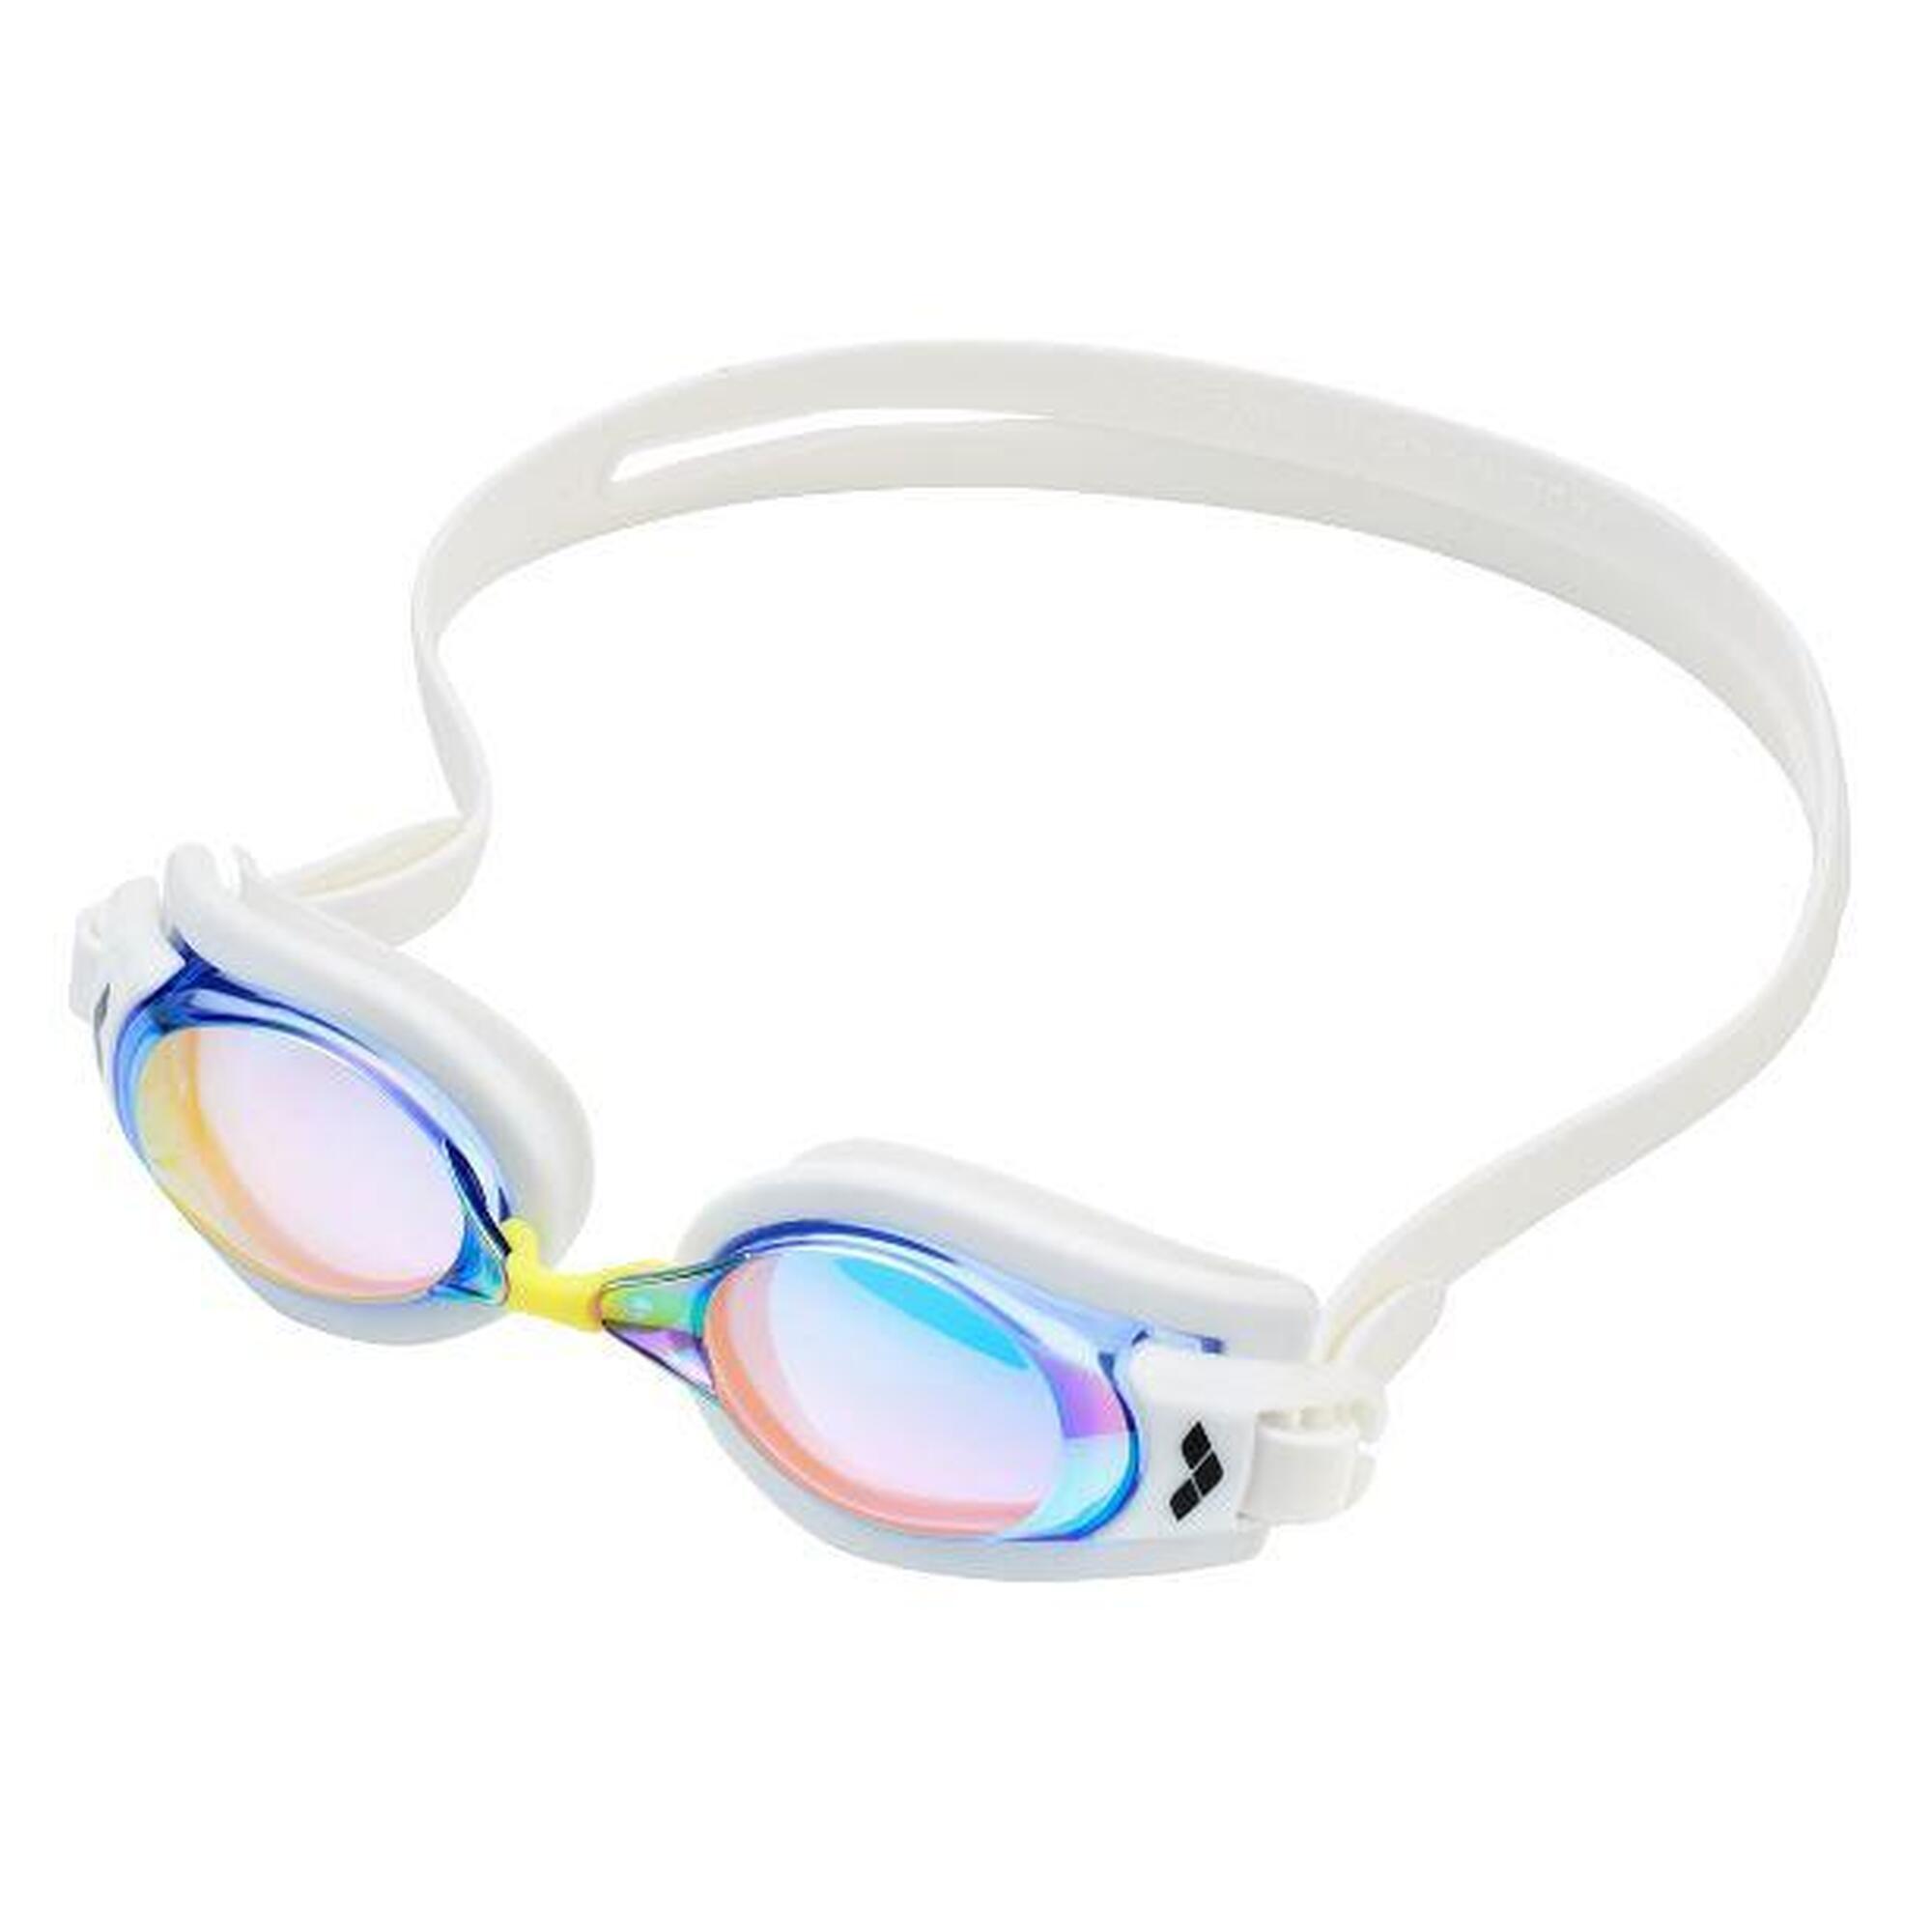 JAPAN MADE RE:NON 400 DIOPTERS OPTICAL MIRROR GOGGLE - WHITE